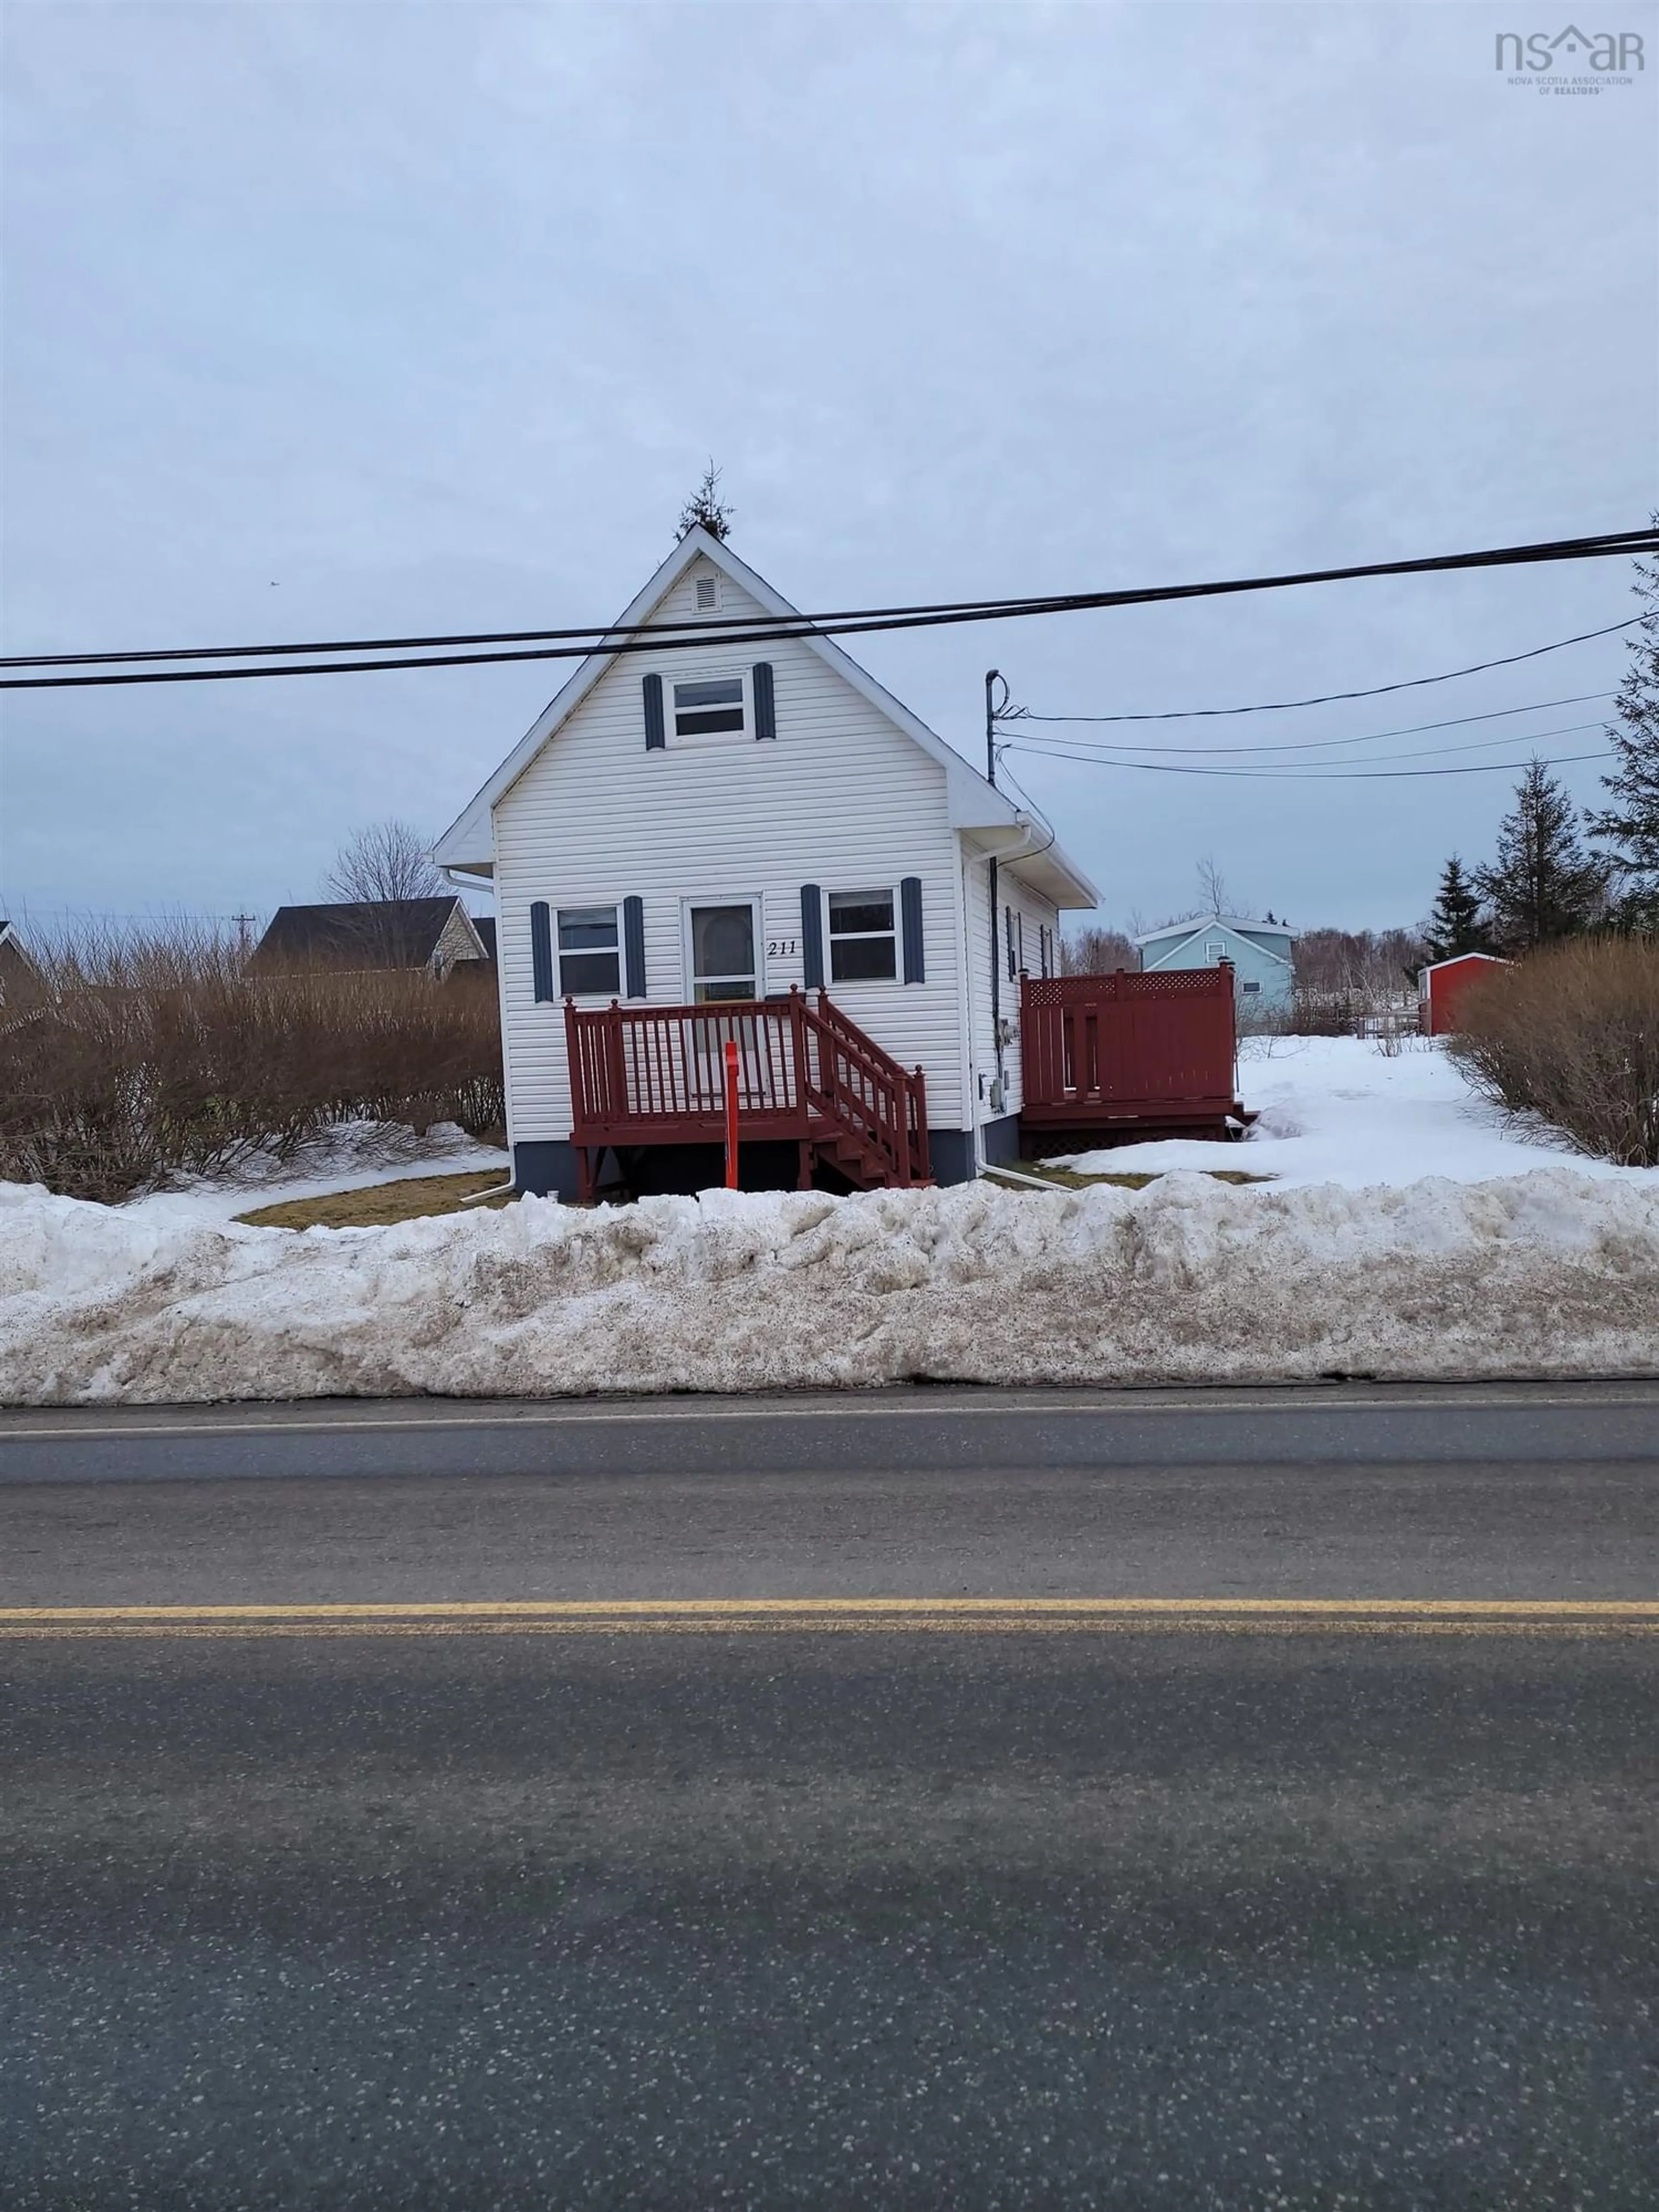 Home with unknown exterior material for 211 213 Brookside St, Glace Bay Nova Scotia B1A 3B7